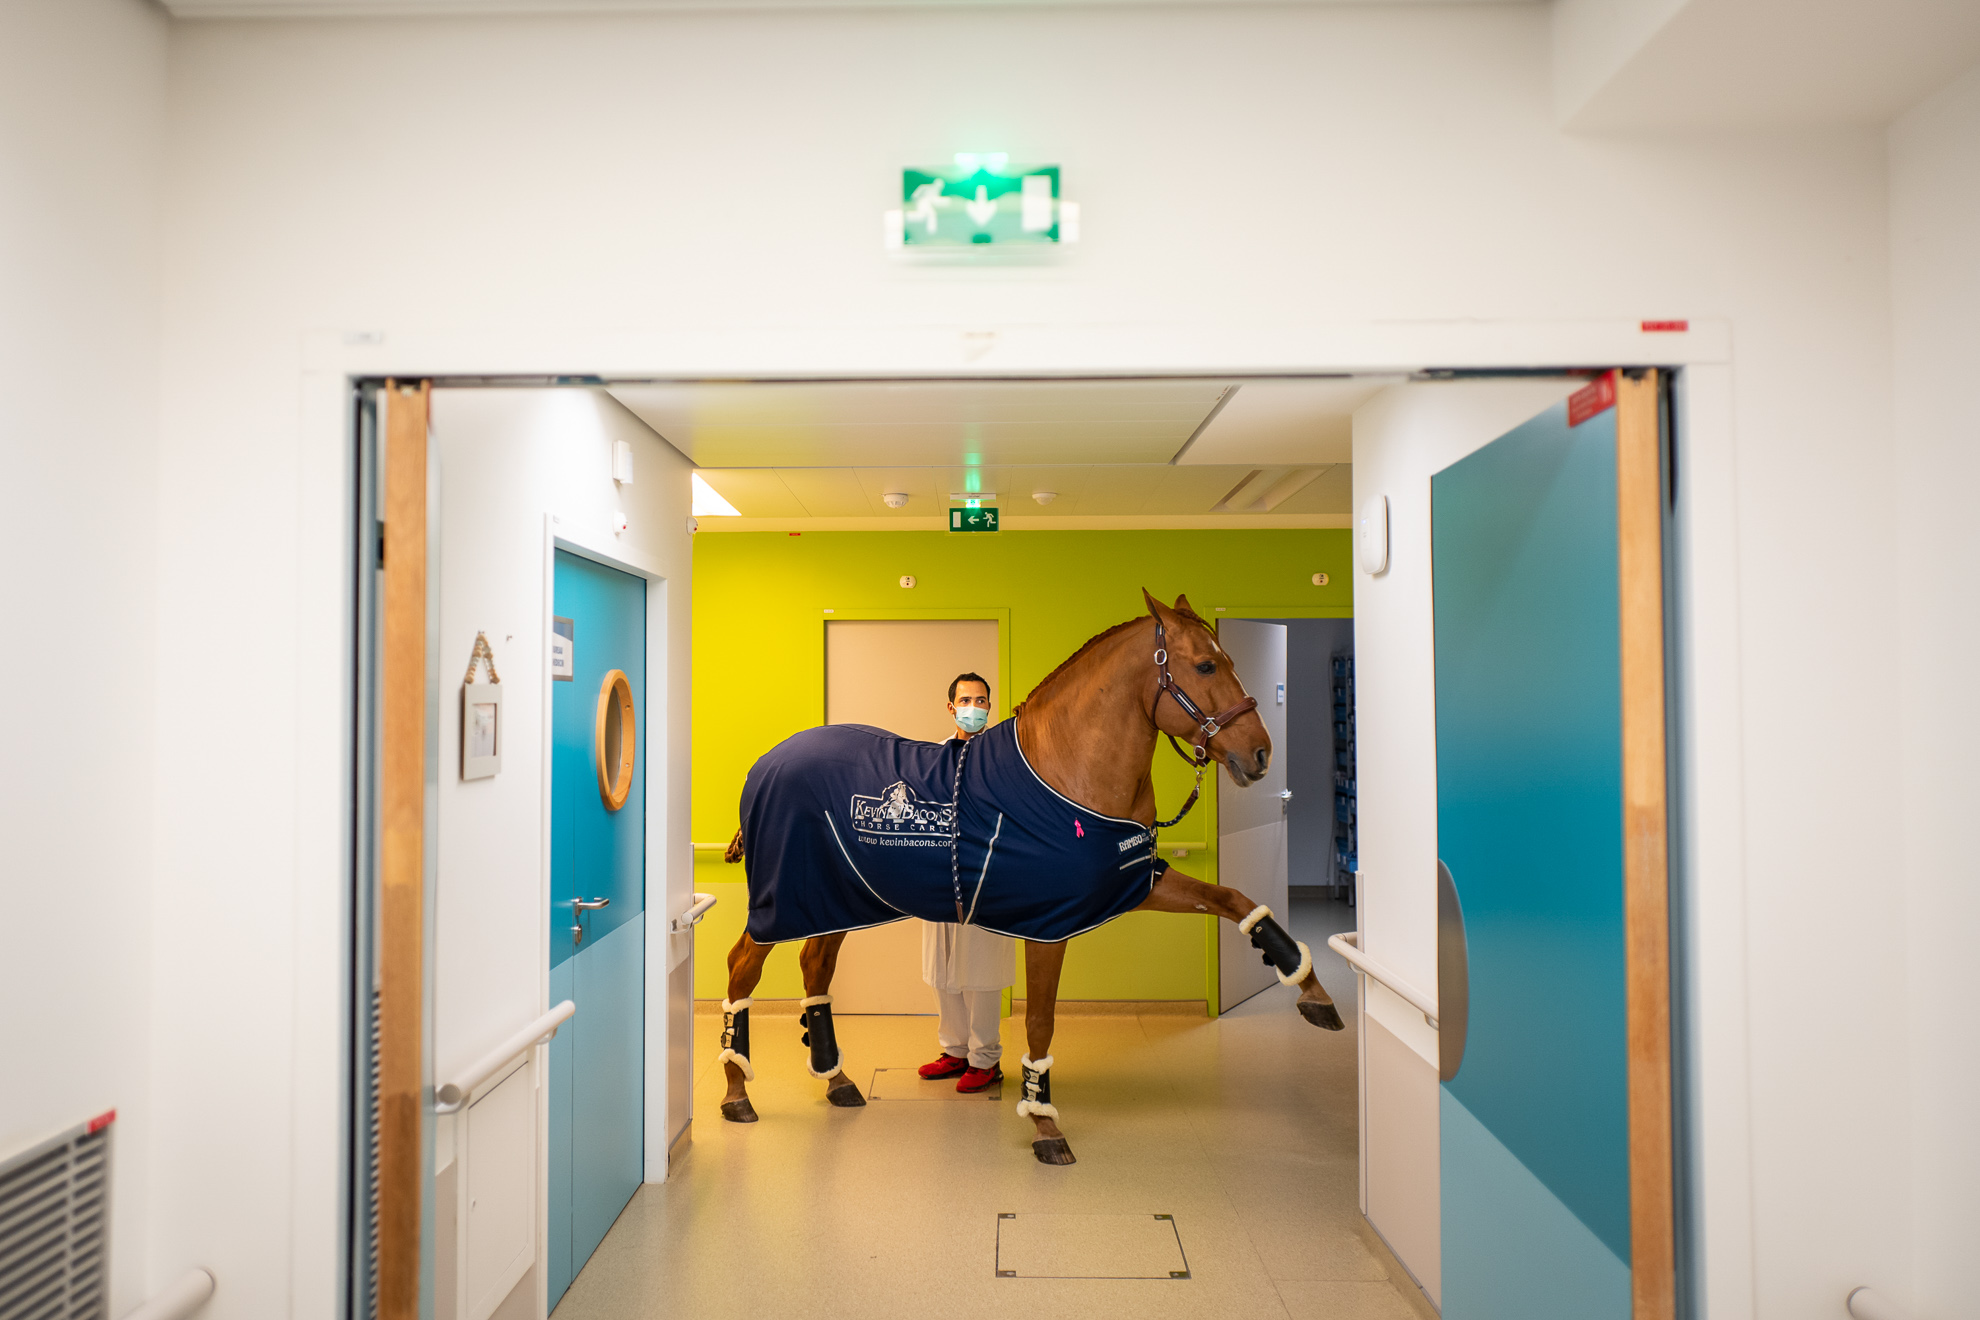 France-Calais 11/17/2020 Palliative care center at the Calais hospital. Peyo indicates to Hassen the room he wants to enter. Fifteen-year-old Peyo the horse is unique in the world. He is able to detect cancers and tumors in humans. When he comes to the palliative care center in Calais, Peyo decides whom he will see. He walks past the room doors and stops or raises his leg when he feels he can help and protect. "Doctor Peyo" stayed nearly two hours in front of this door, not budging an inch, to protect a lady near the end of her life. "Me, I accompany him, but I let him do what he wants, he’s the one who decides. Peyo was diagnosed with autism, his intelligence, his faculties go beyond anything one can imagine. What really pushed scientists to take an interest in him and open the health establishment doors to us, was this ability to greatly reduce {the patient's dosage of} all hard drugs and thus allow a more peaceful departure", Hassen says.